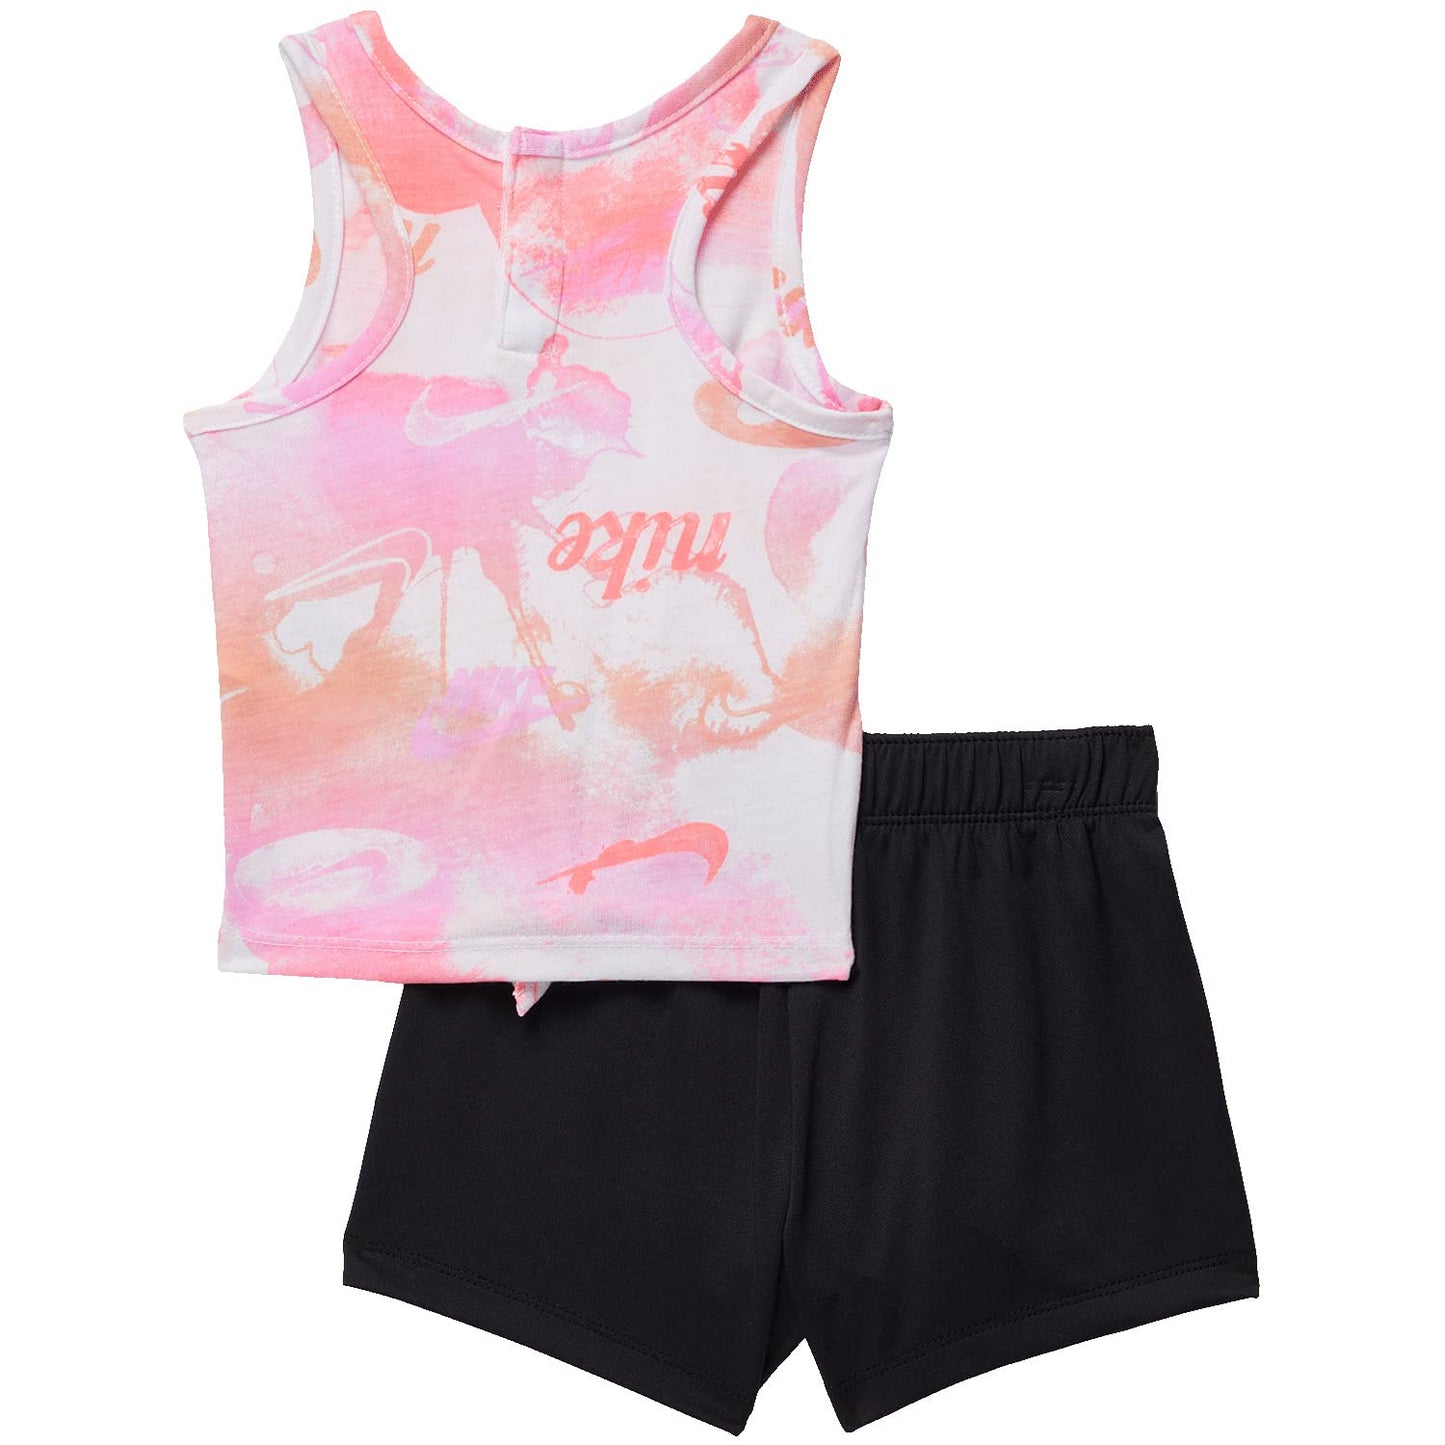 Image 2 of Printed Knotted Tank Top and Jersey Shorts Set (Infant)